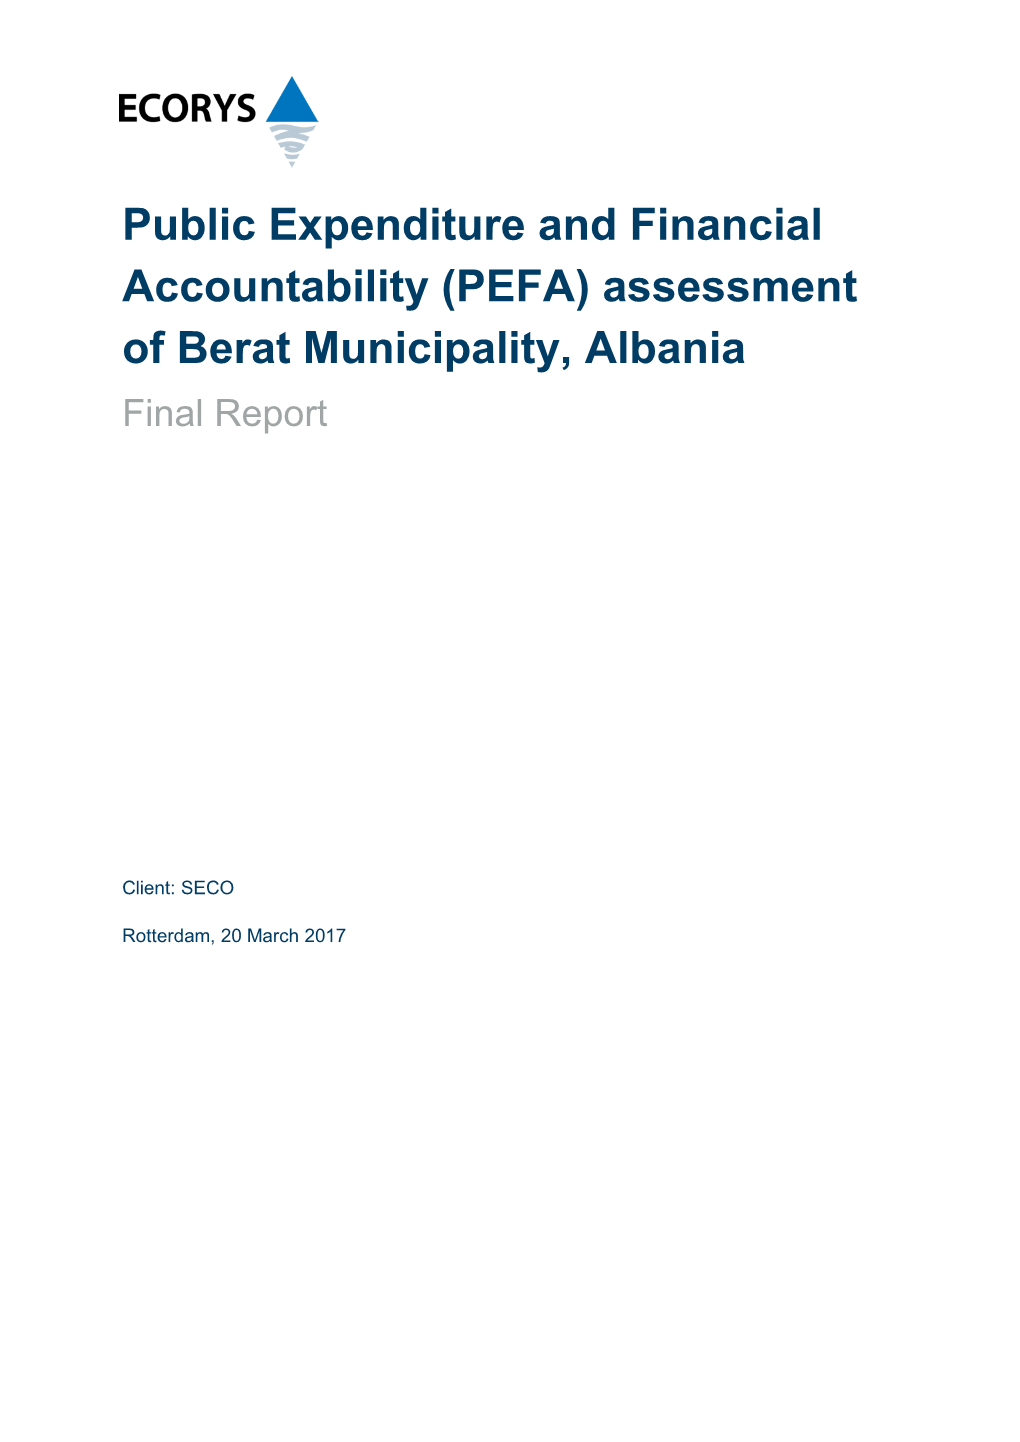 Conducting of Public Expenditure and Financial Accountability (PEFA